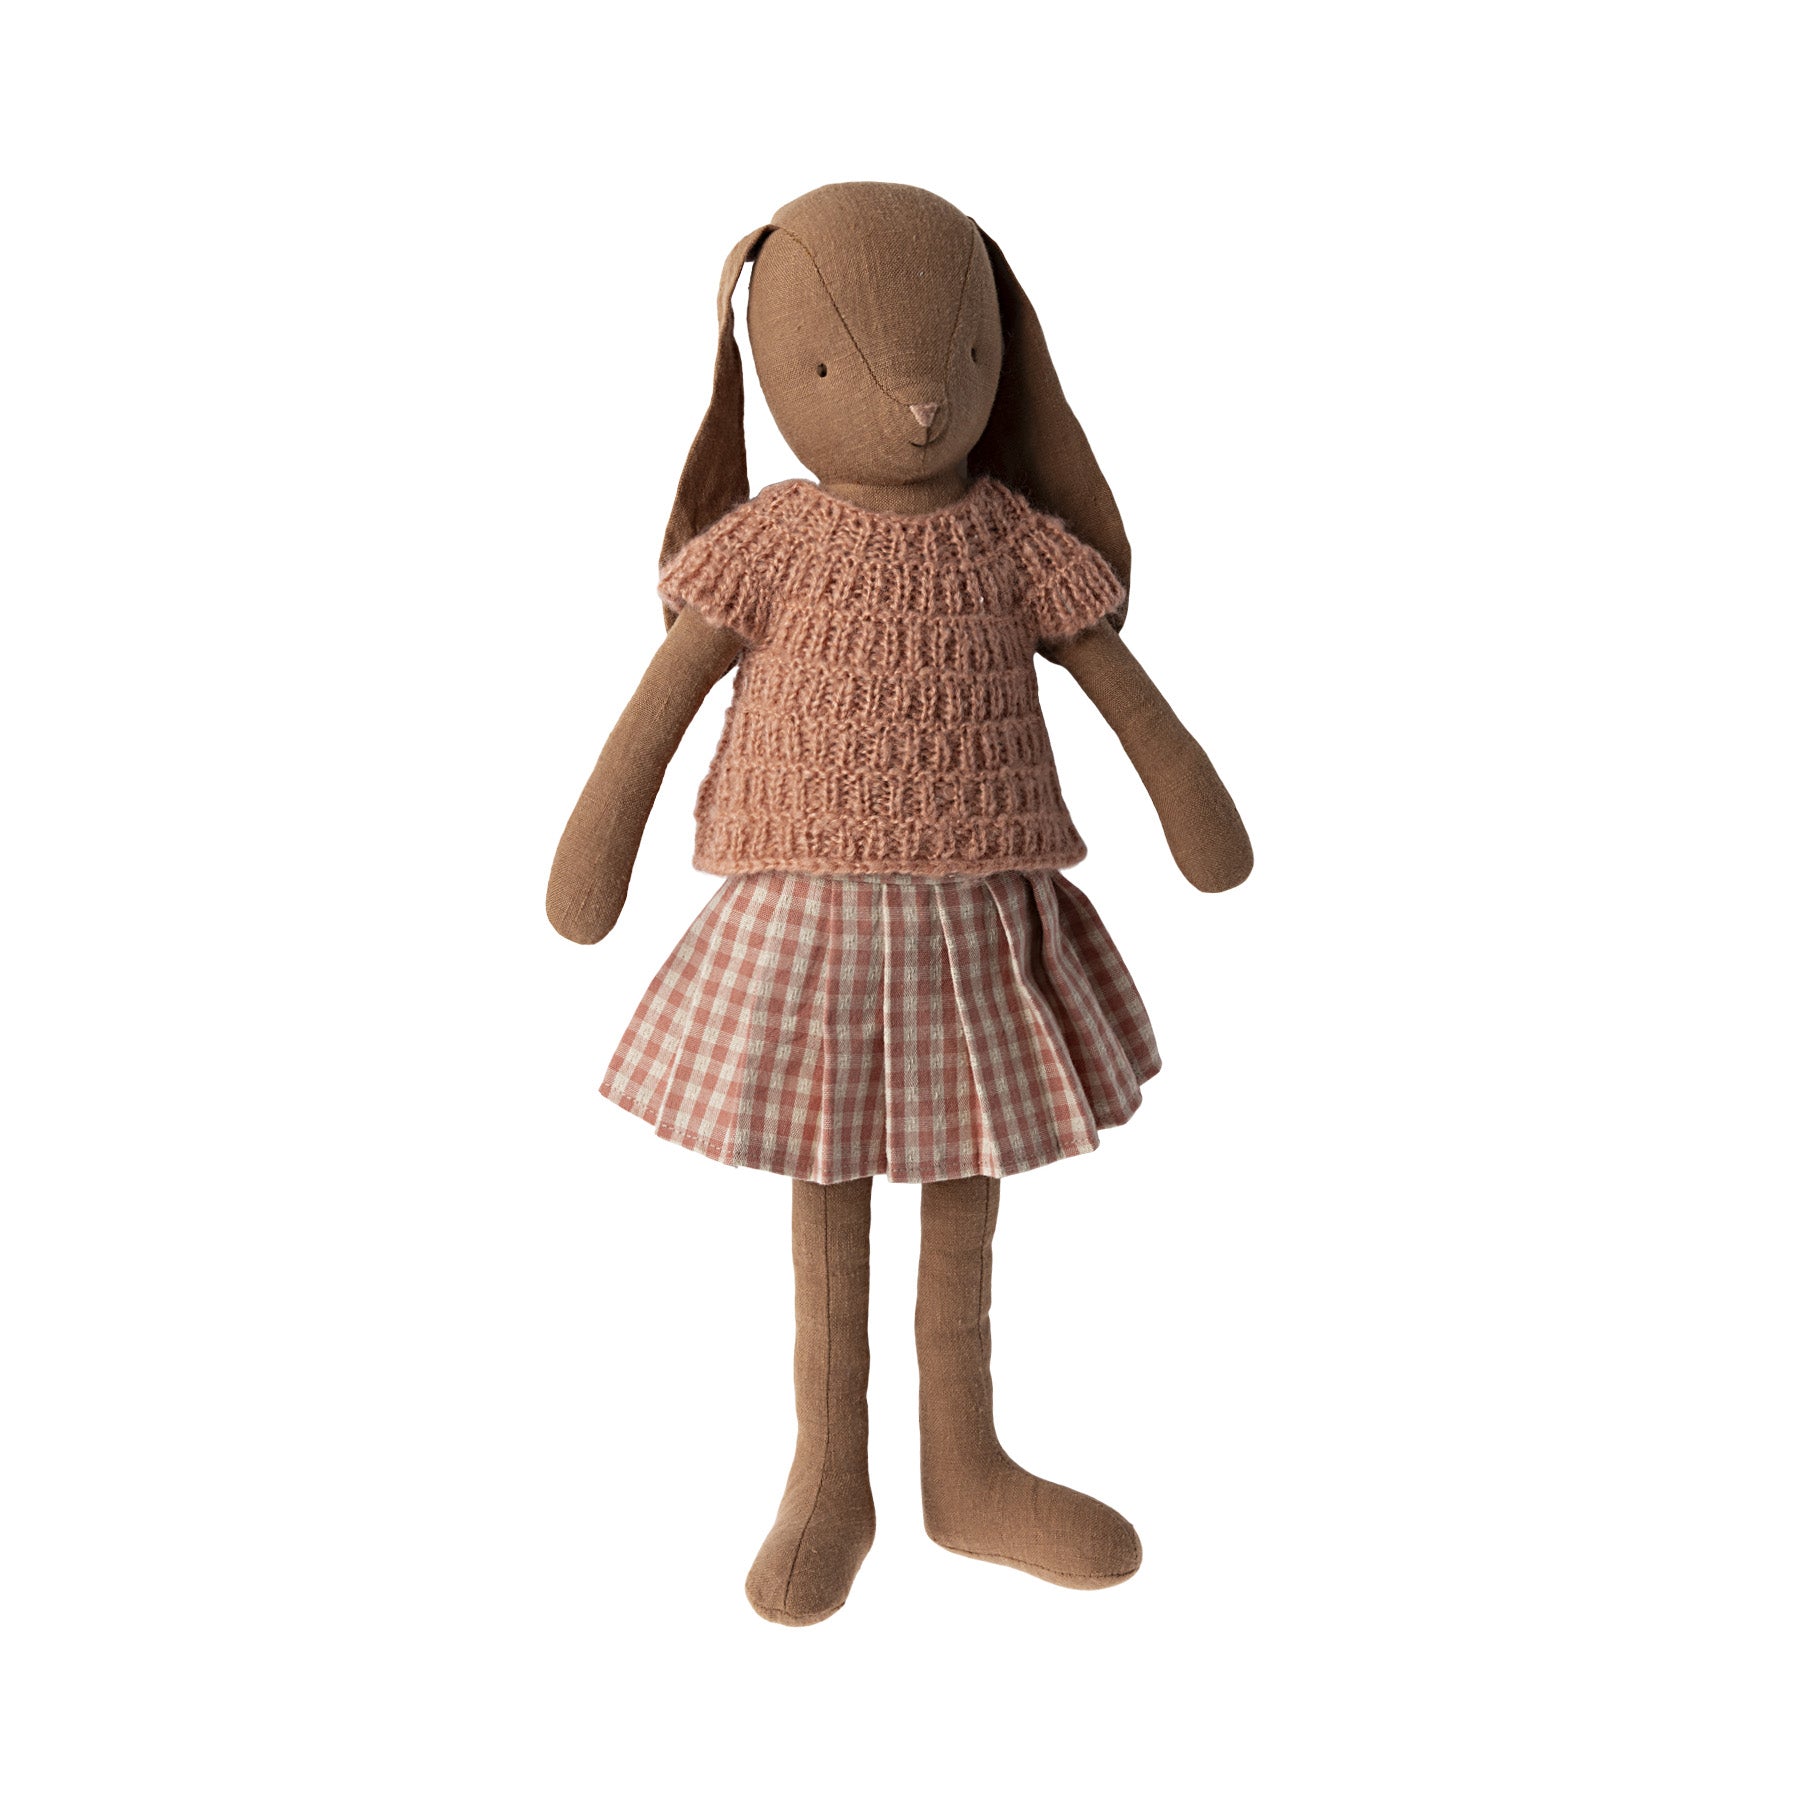 Maileg Bunny Size 3, Chocolate Brown - Knitted Top and Skirt